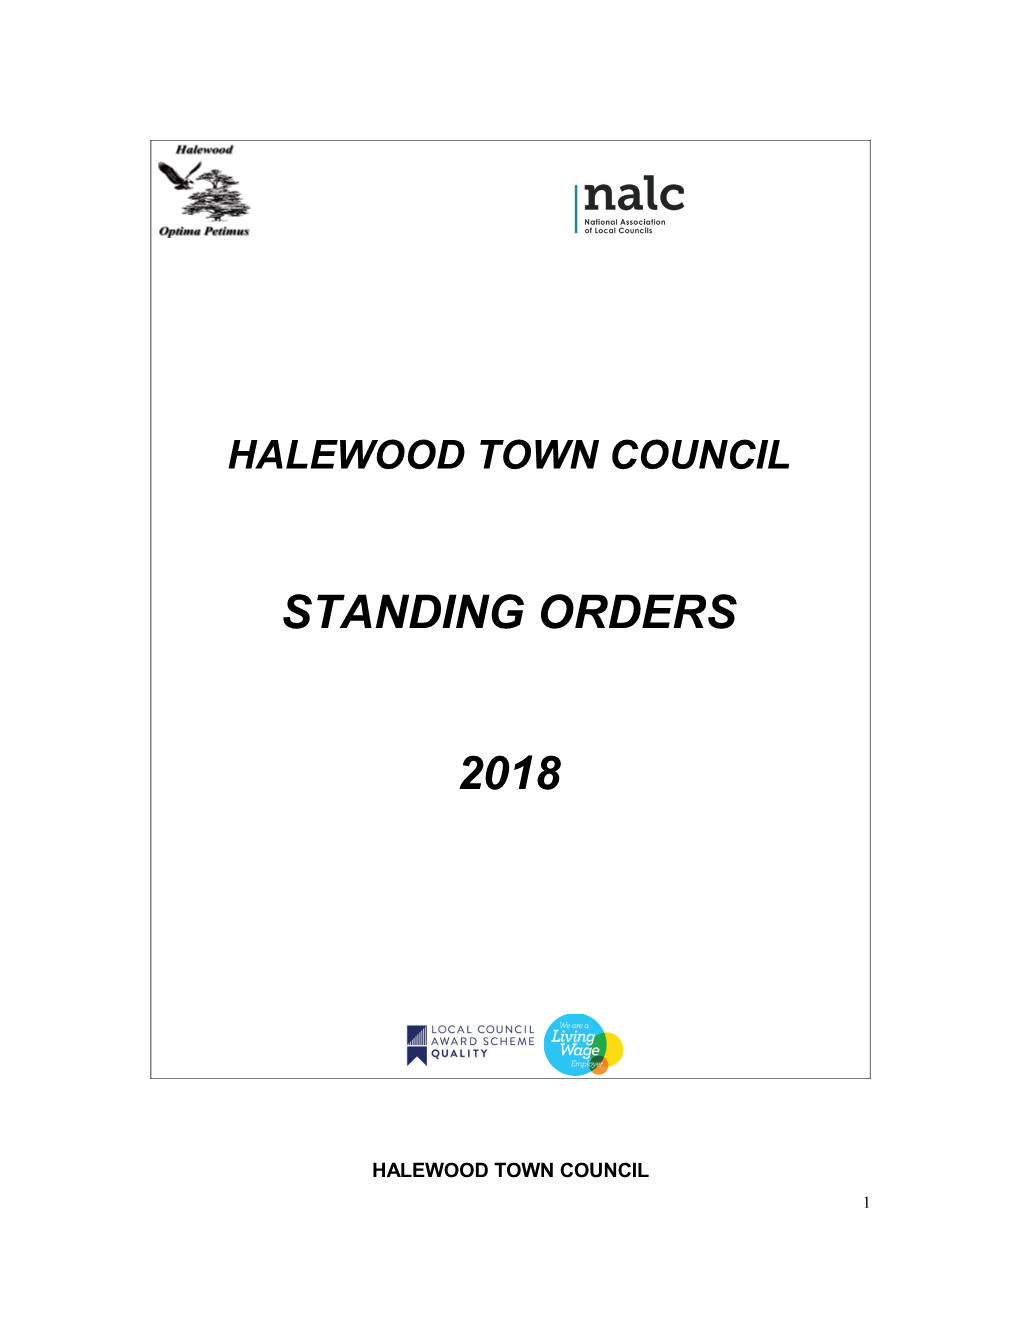 Standing Orders for Halewood Town Council